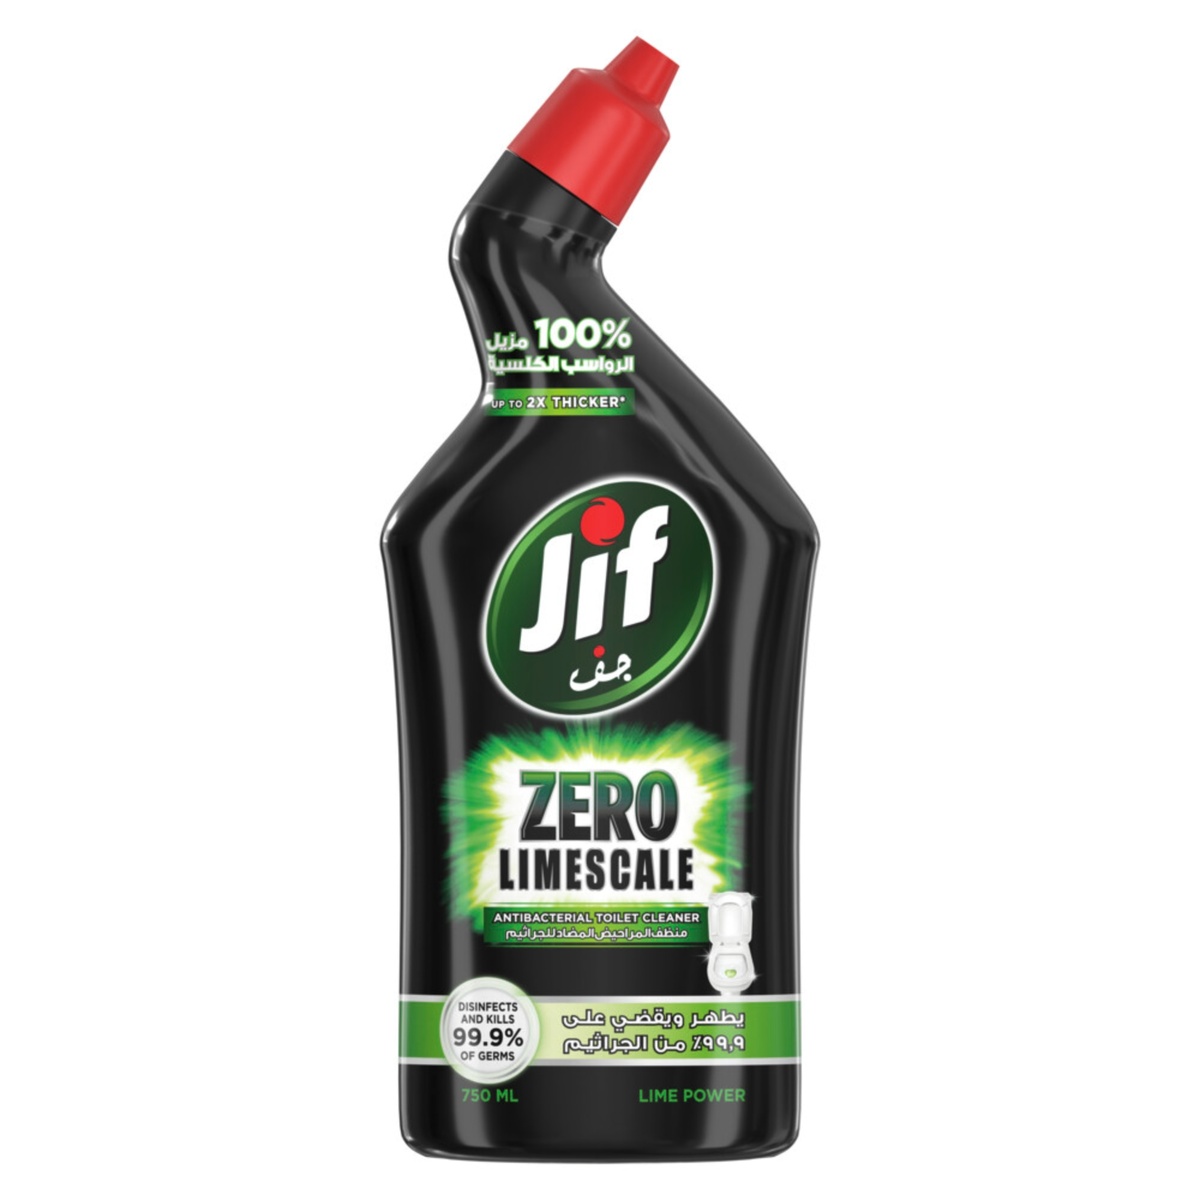 JIF Zero Limescale Lime Anti-Bacterial Toilet Cleaner 750ml